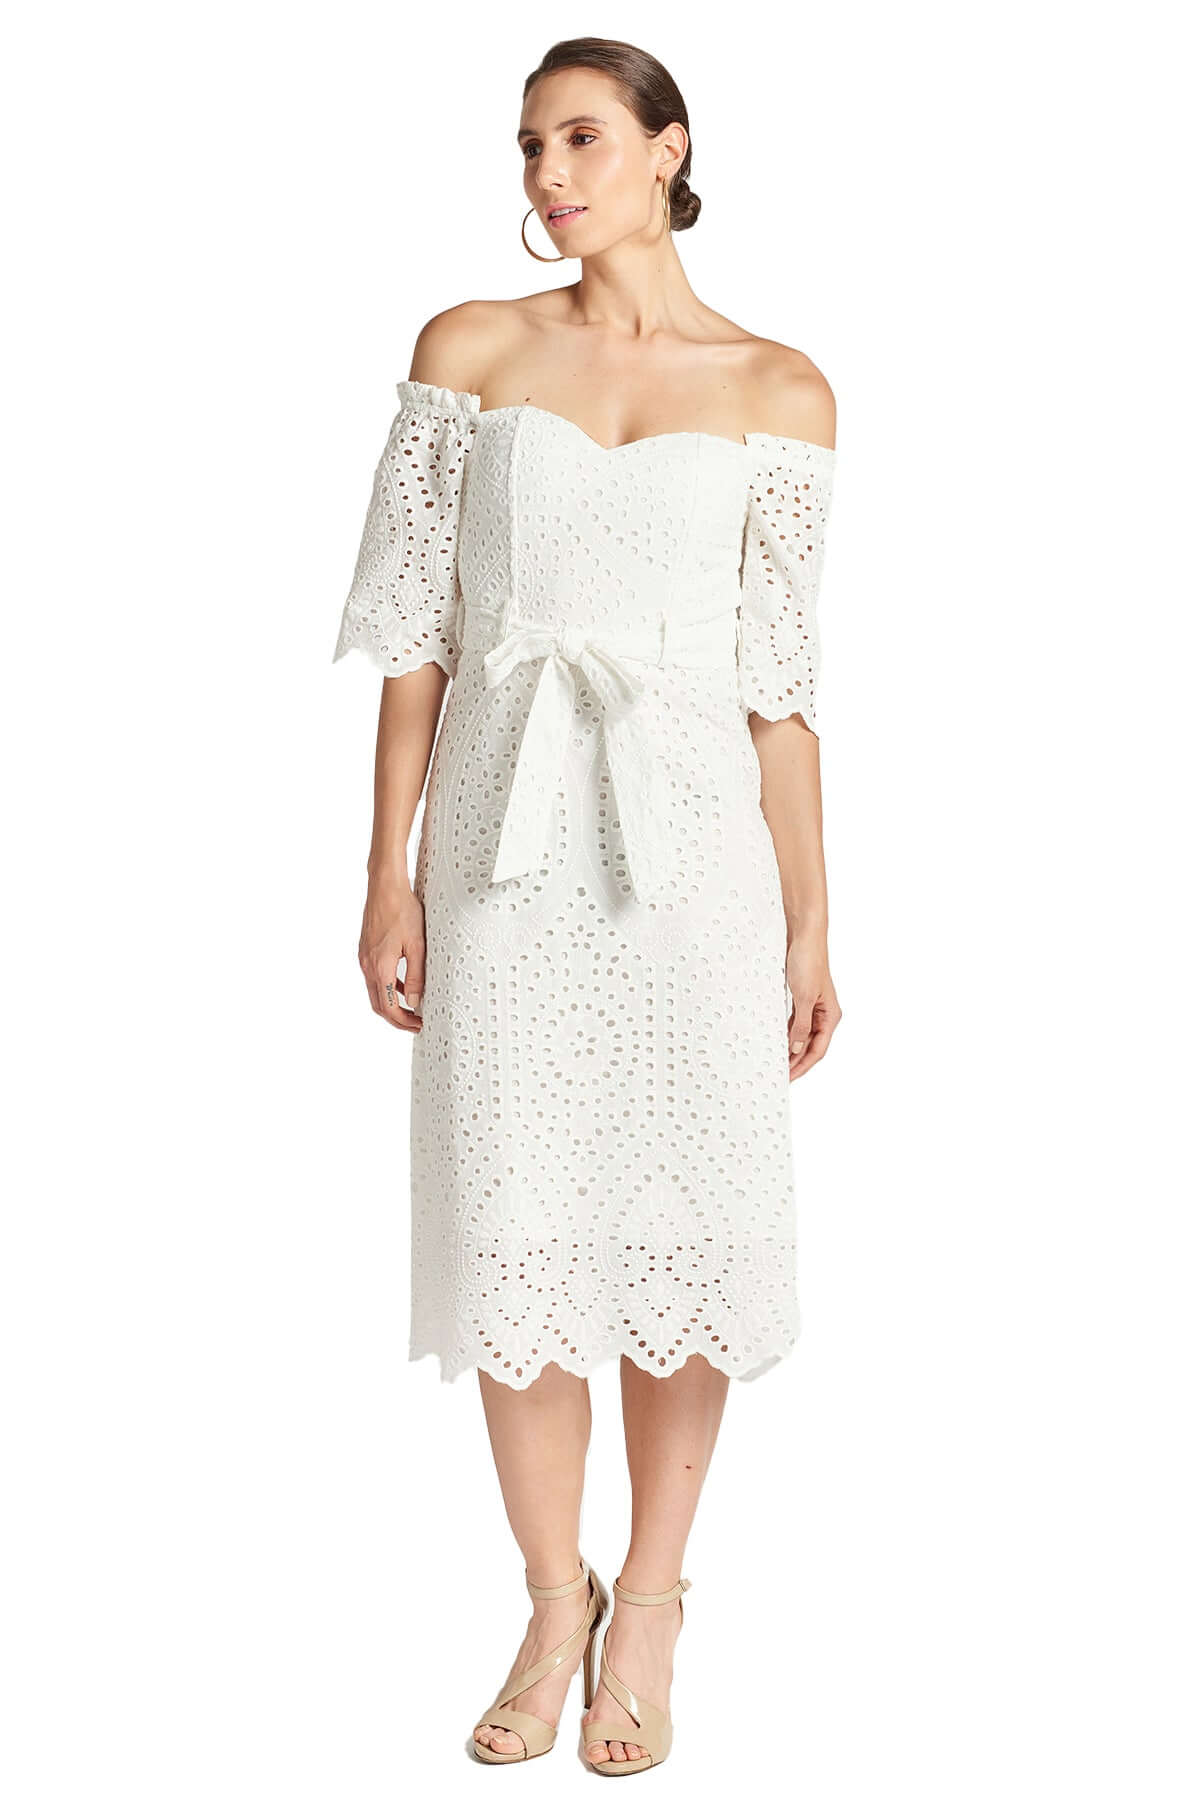 Front view of model wearing the Simona Maghen Jasmine Dress, white cotton scalloped eyelet midi a-line dress with off the shoulder sweetheart neckline, self belt, and short sleeves.